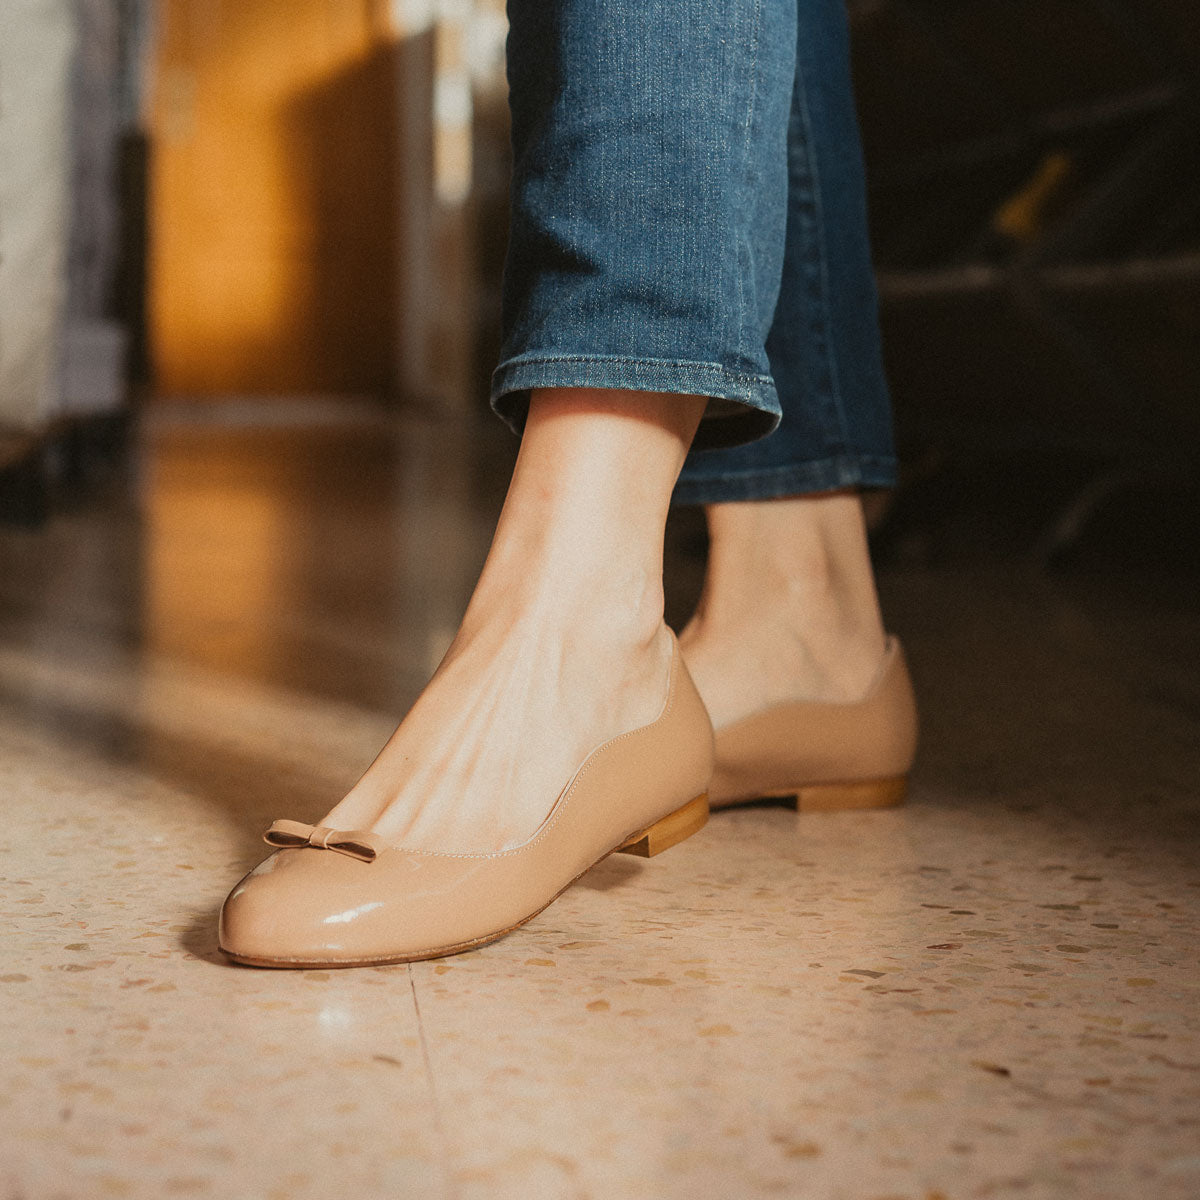 oleah shoes patent ballerina flats in nude pecan, nude ballerina patent flats, nude ballerina flats, nude patent flats, comfortable nude flats